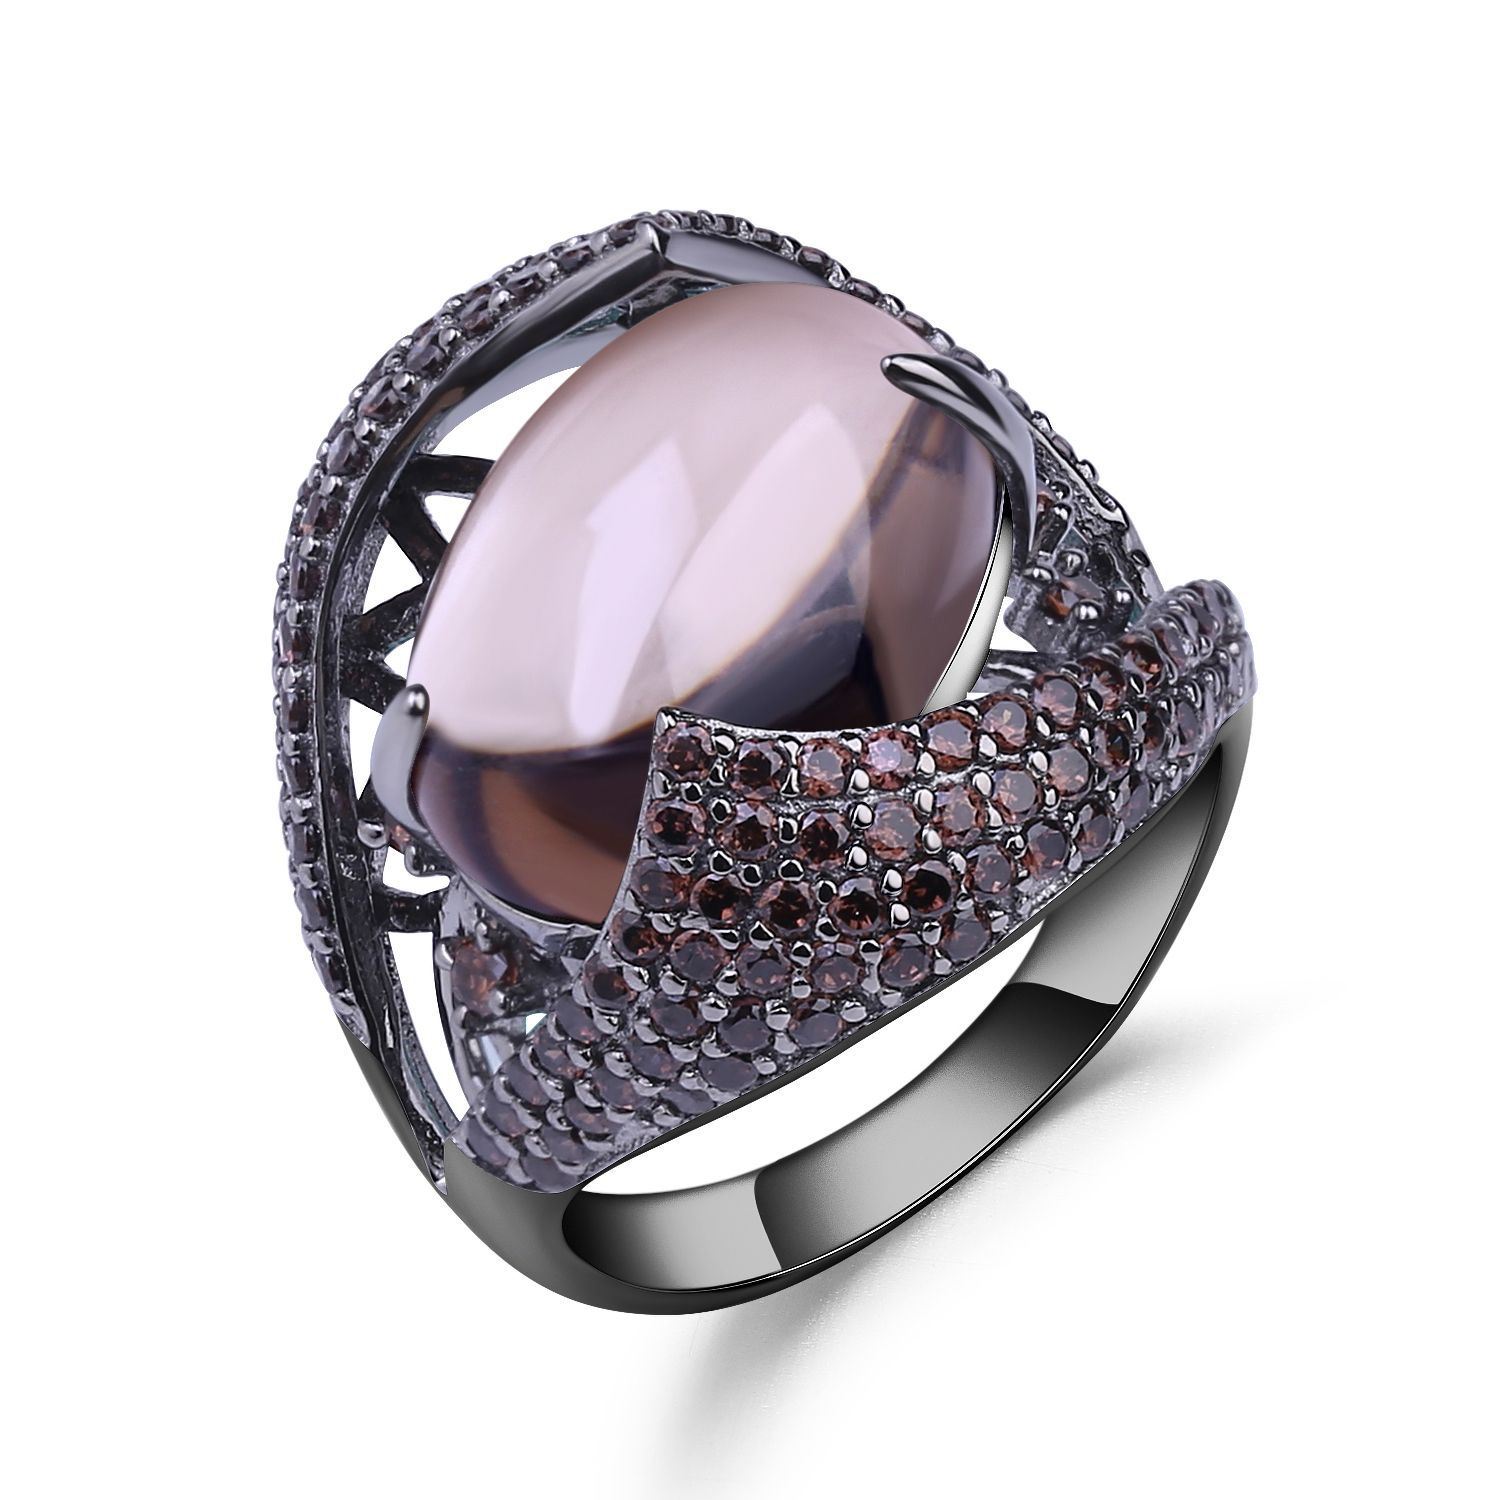 Luxury Inlaid Oval S925 Sterling Silver Ring-BlingRunway